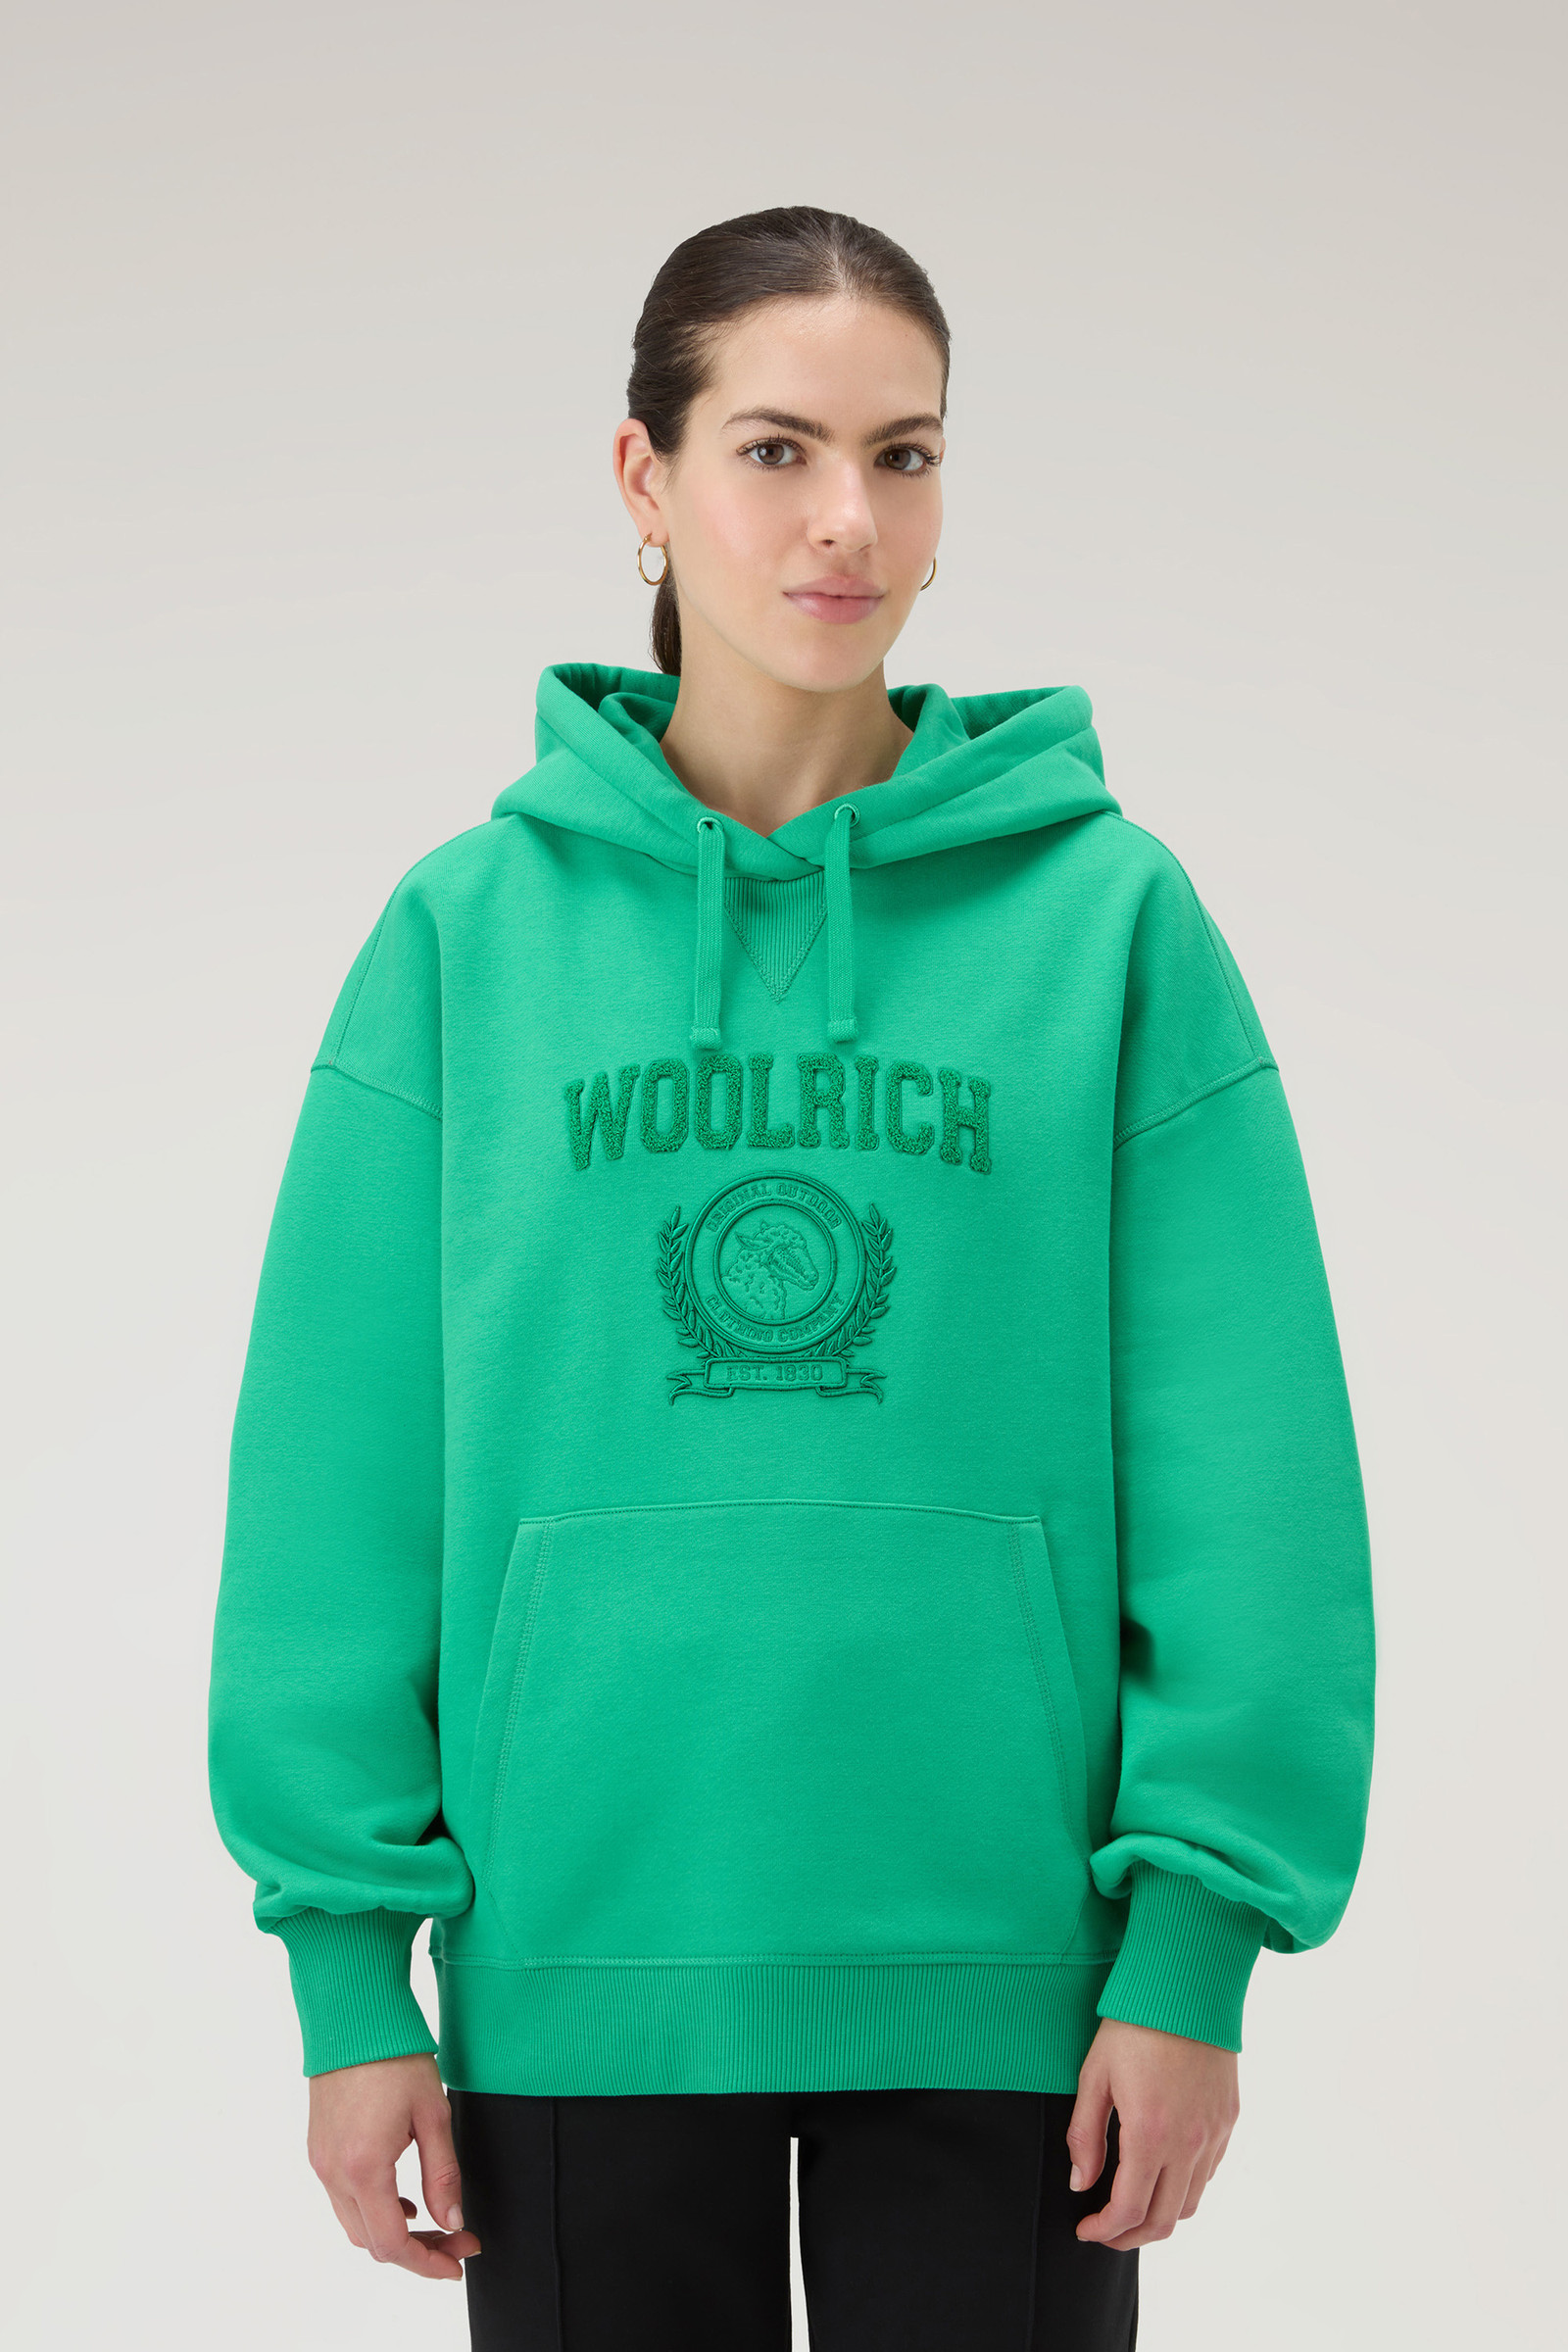 Cotton hoodie by Woolrich